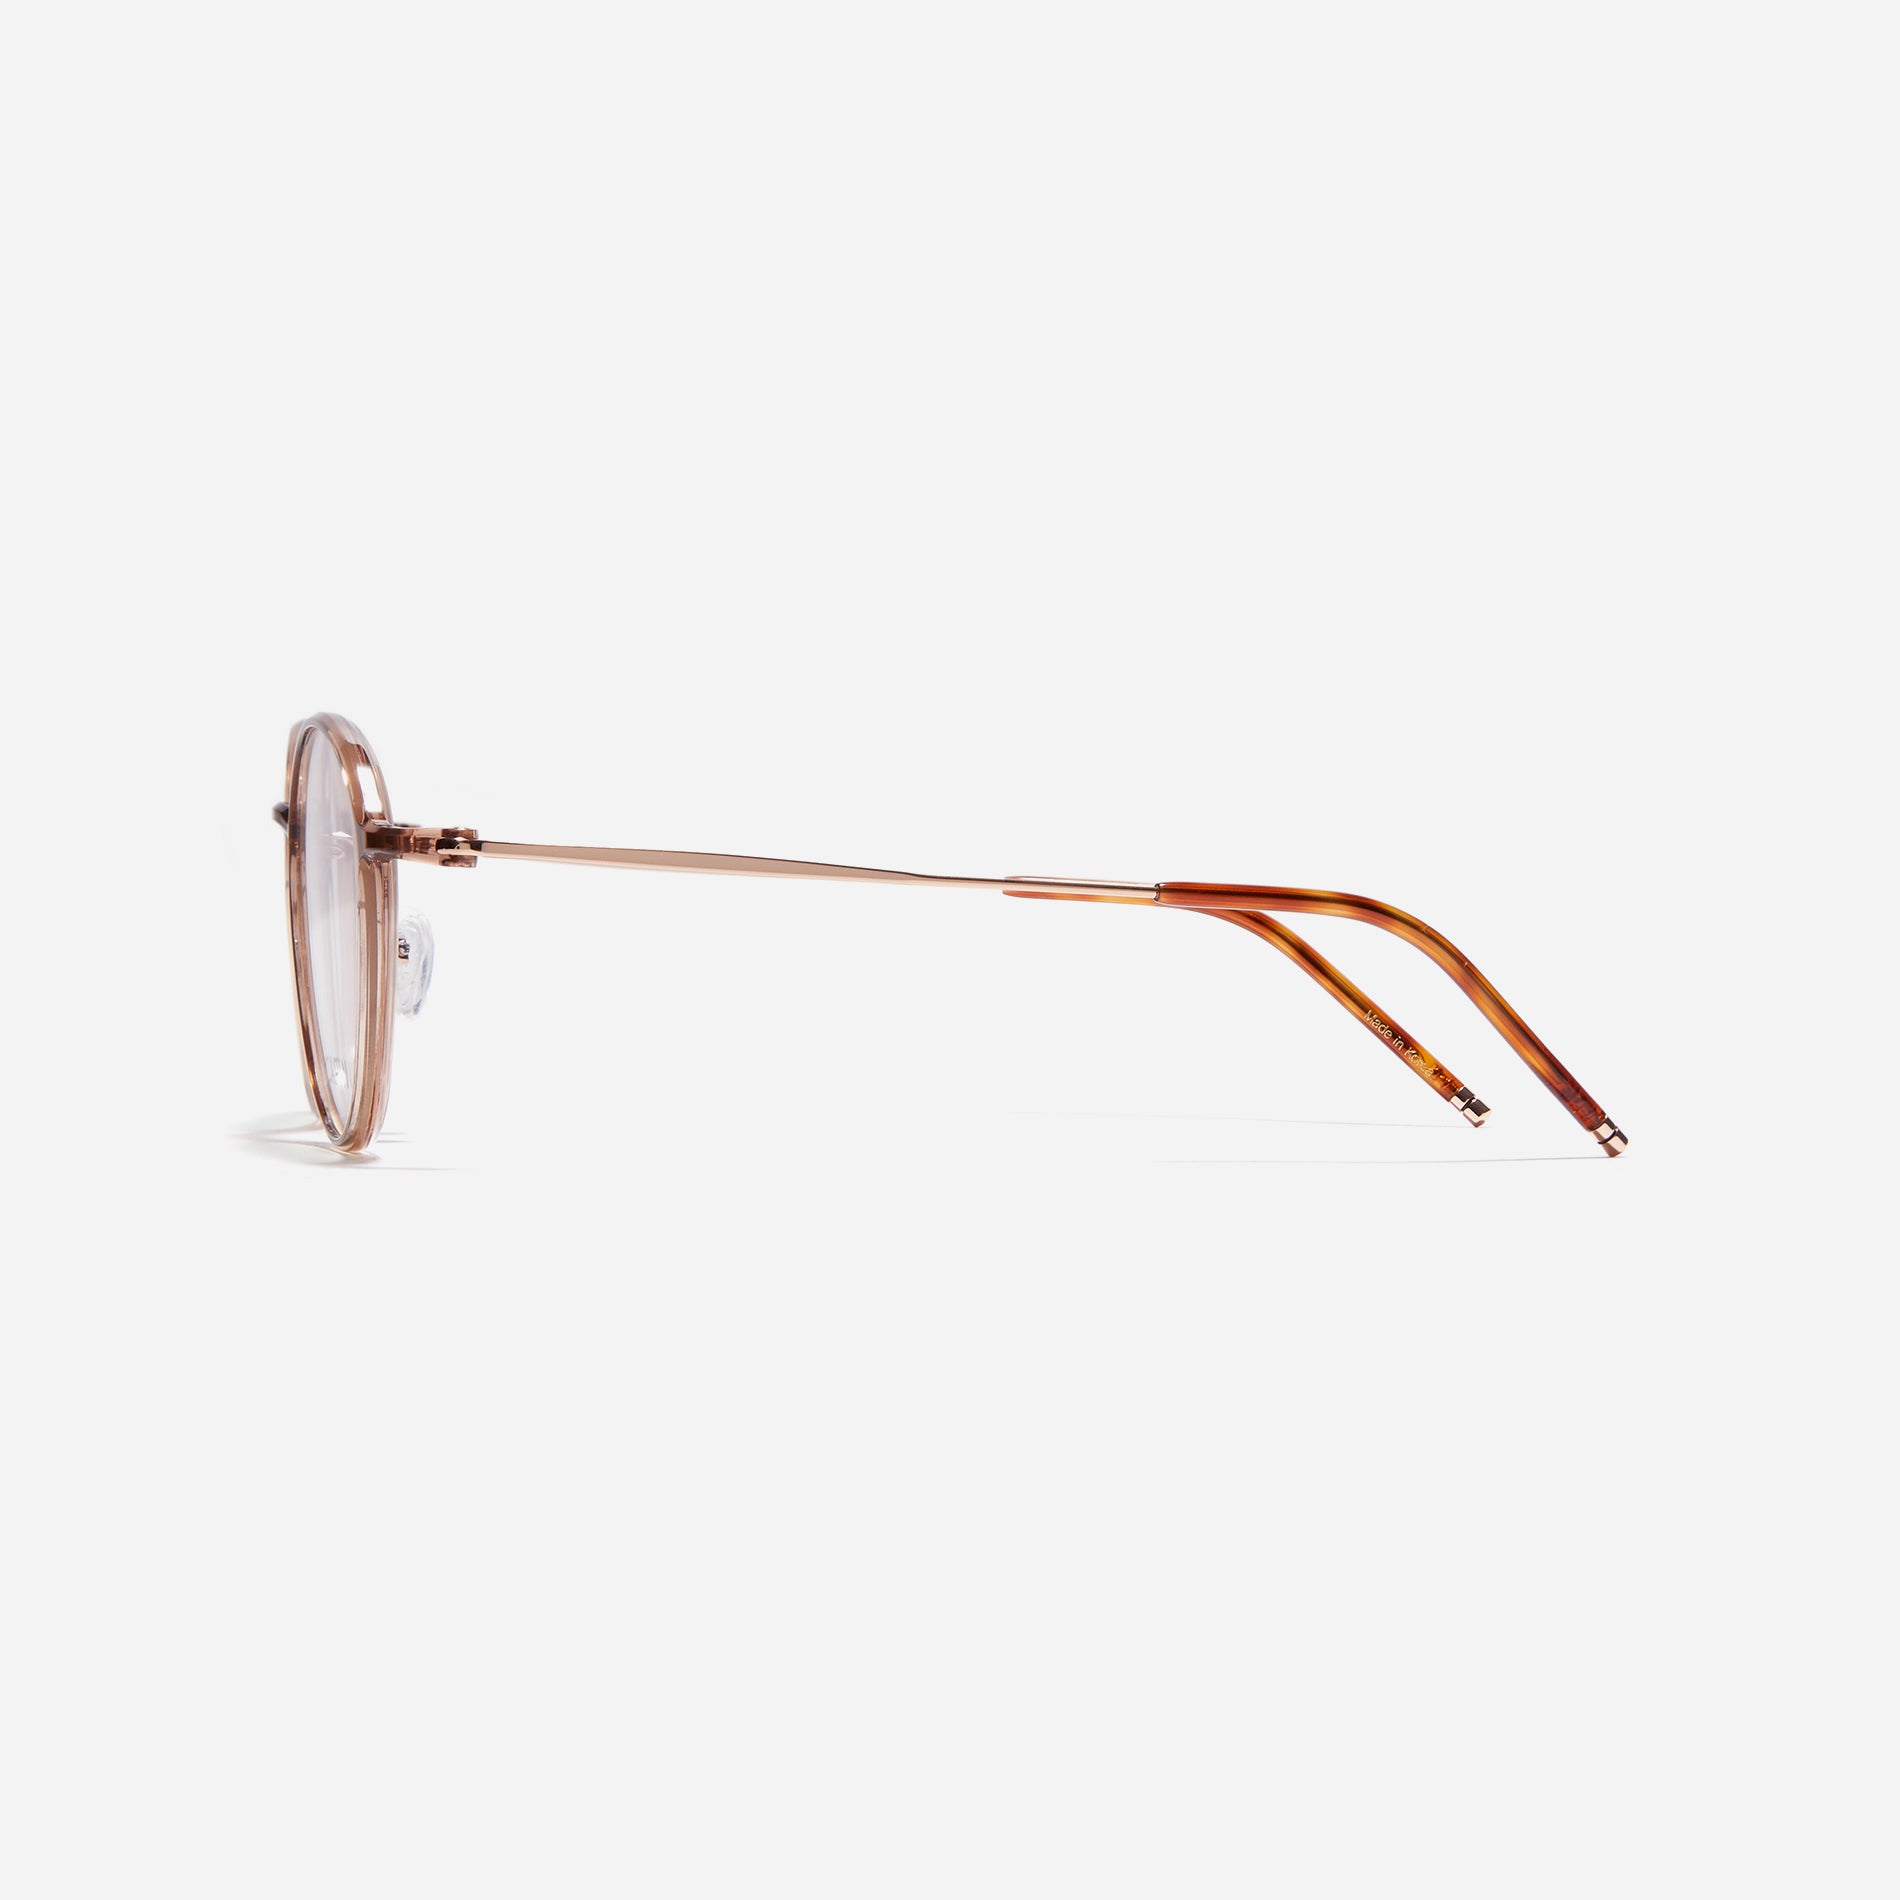 Ultra-lightweight round-shaped eyeglasses crafted using cutting-edge materials sourced from the French company ARKEMA. These glasses offer robust durability and consistently comfortable fit.